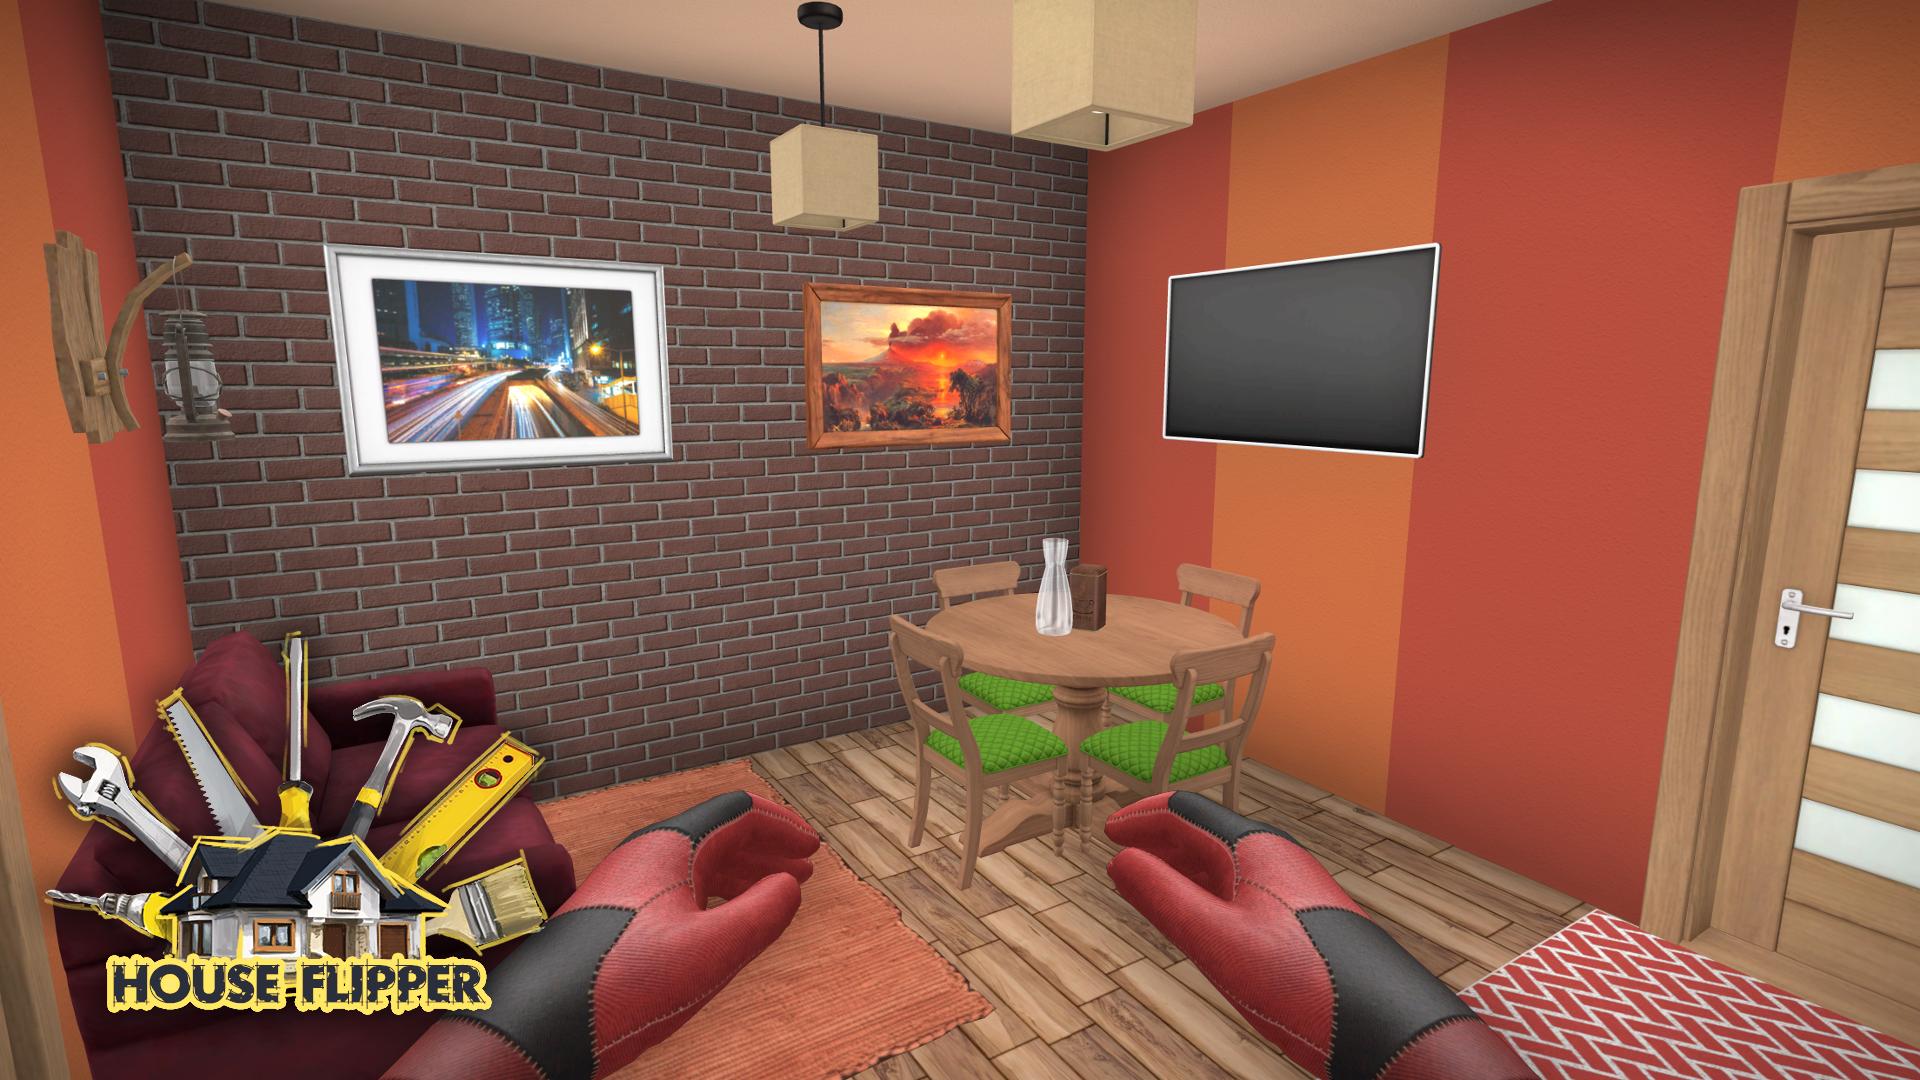 House Flipper Home Design, Renovation Games for Android APK Download